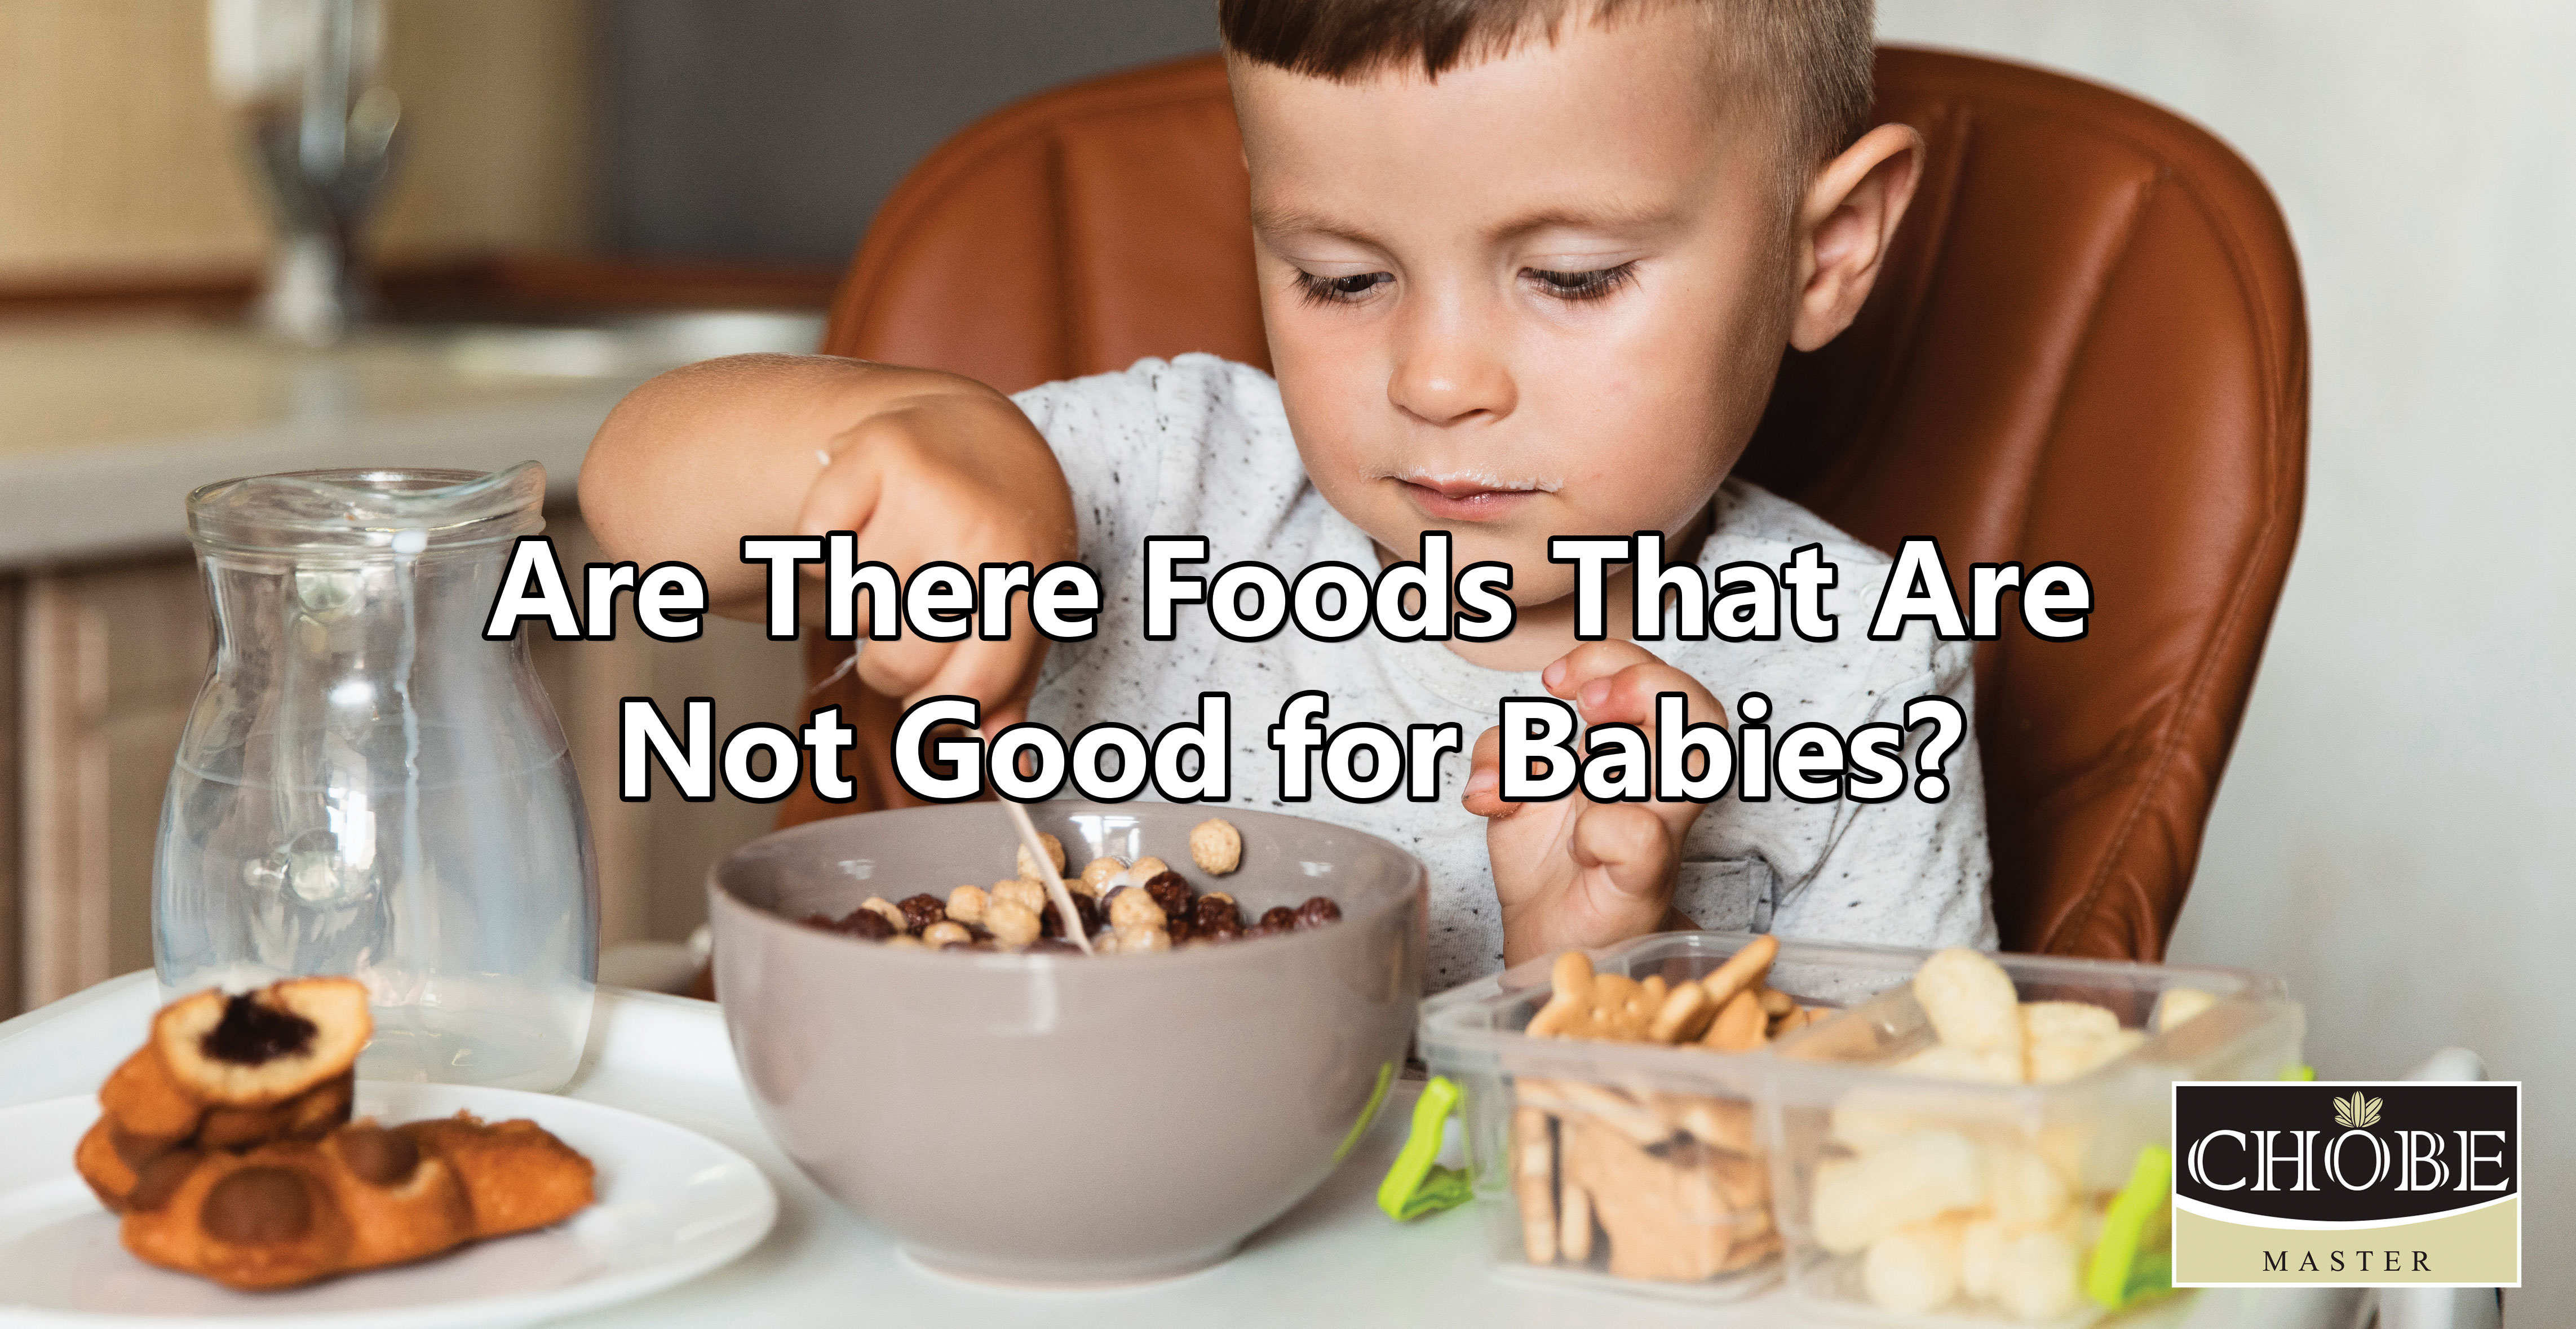 Are There Foods That Are Not Good for Babies?